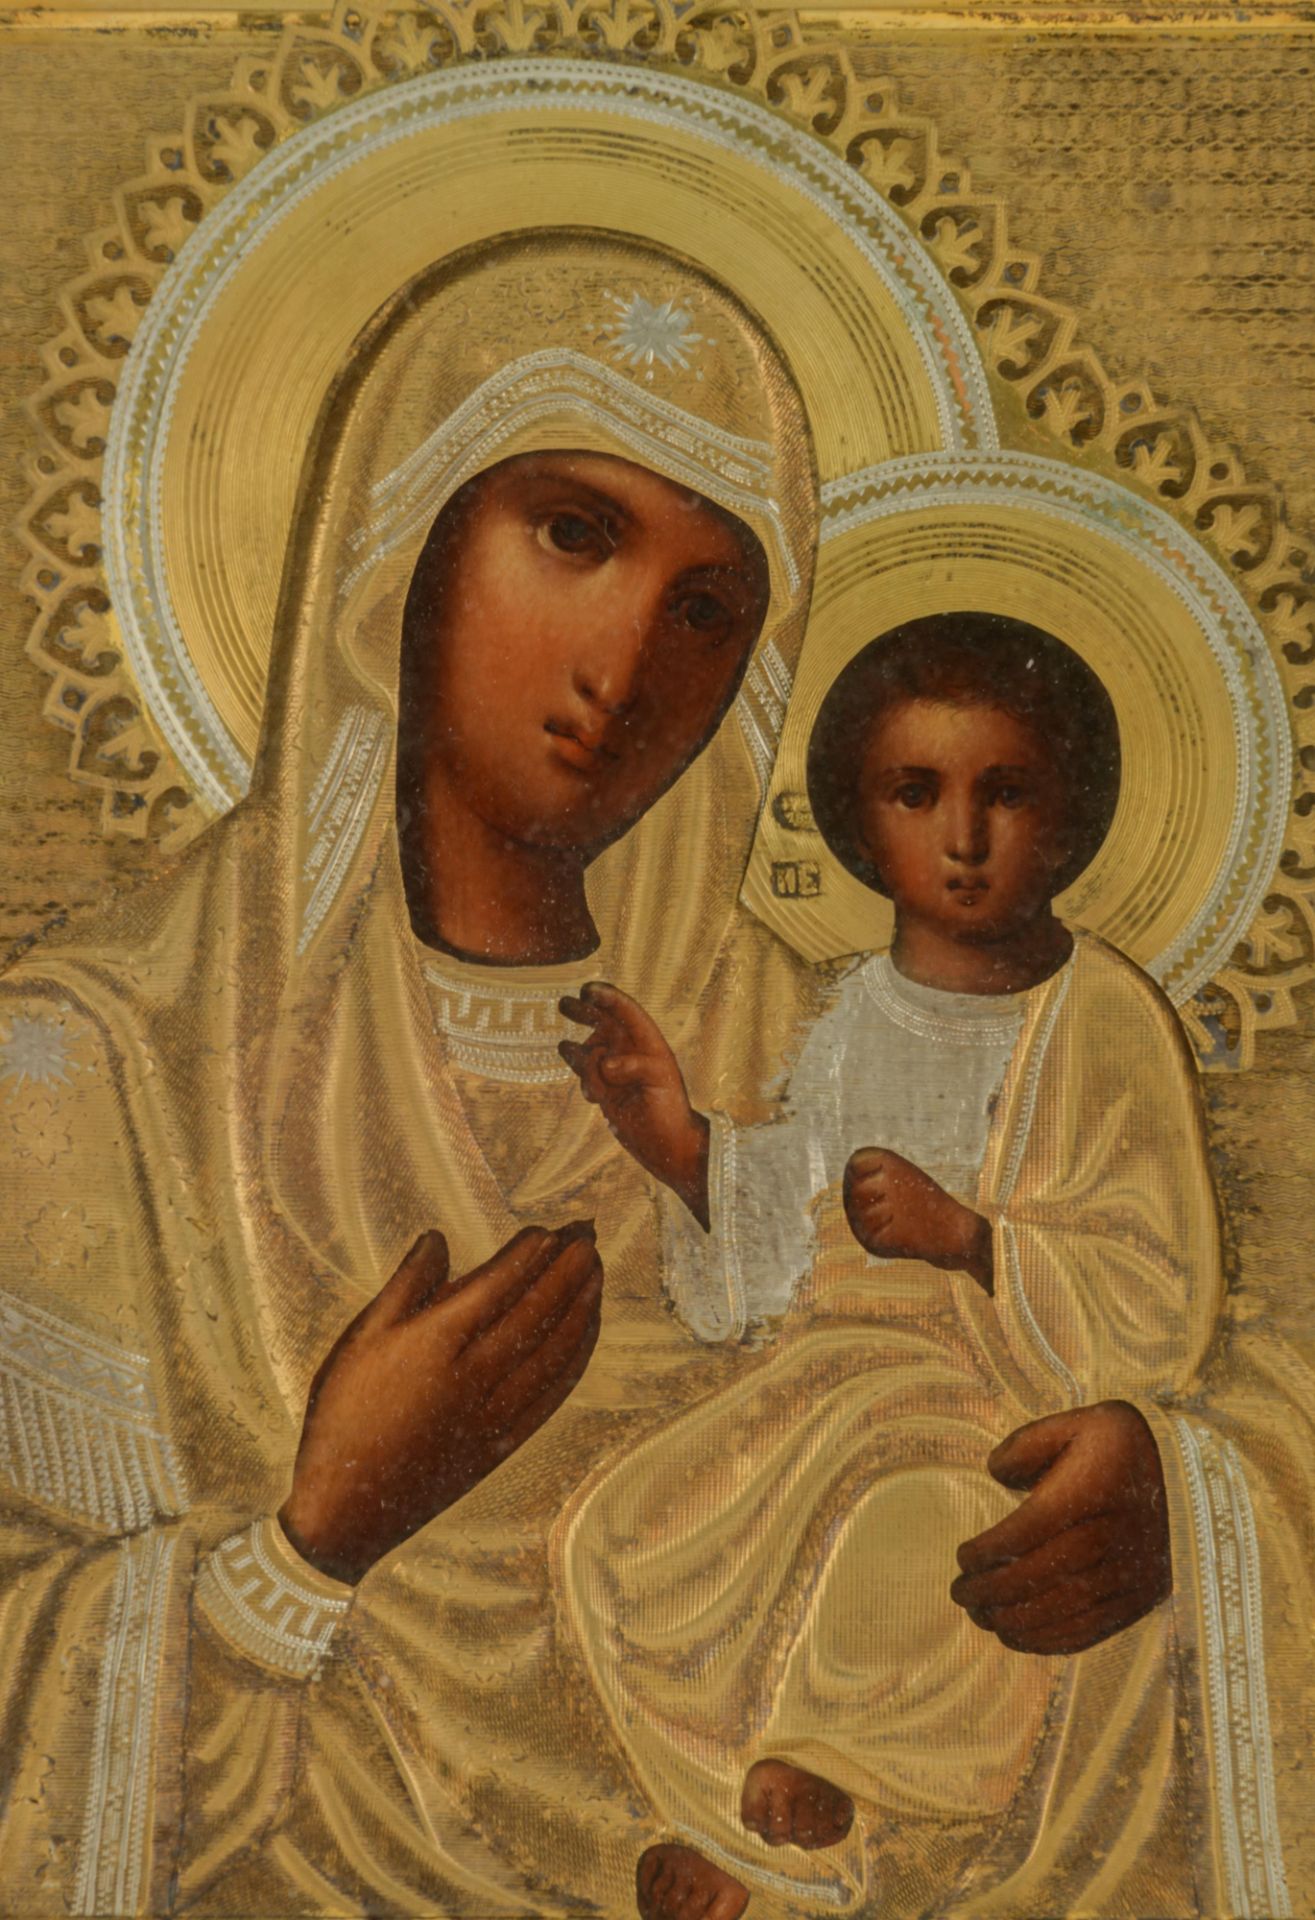 An Eastern European travel icon, depicting the Holy Mother and Child, with silver Reza, 25 x 38 cm - Image 5 of 7